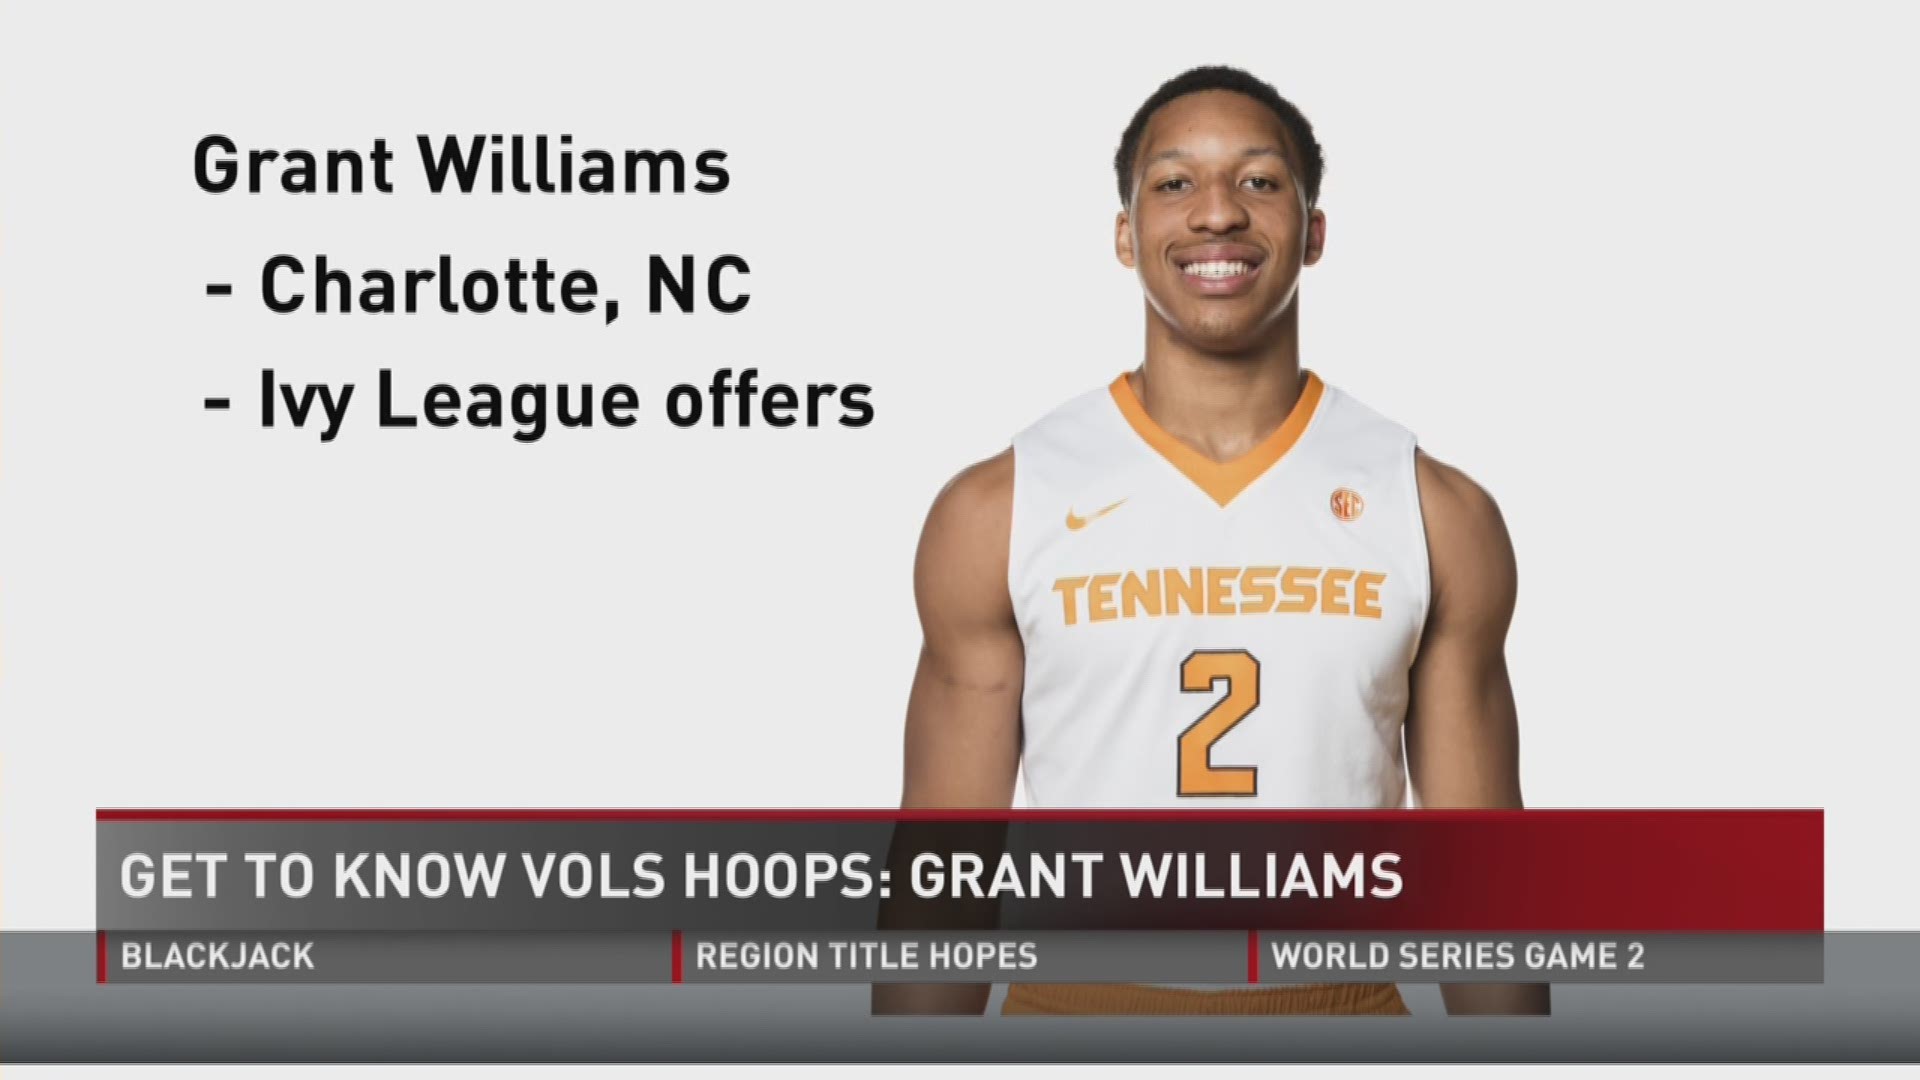 Tennessee freshman Grant Williams is a smart and multi-talented forward from Charlotte, North Carolina.